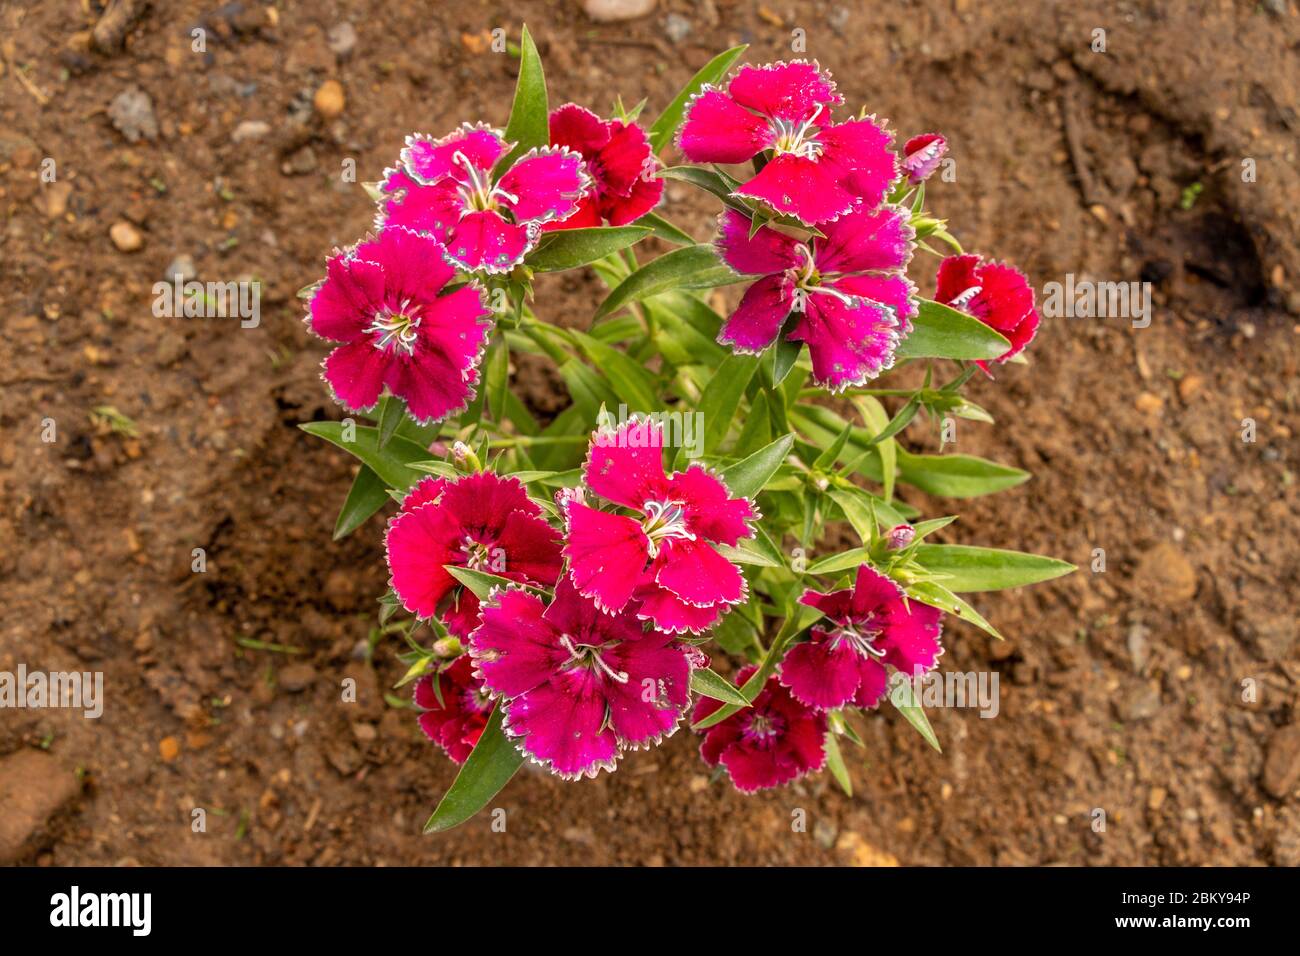 Red sweet william or dianthus barbatus  flower plant growing on soil, closeup Stock Photo